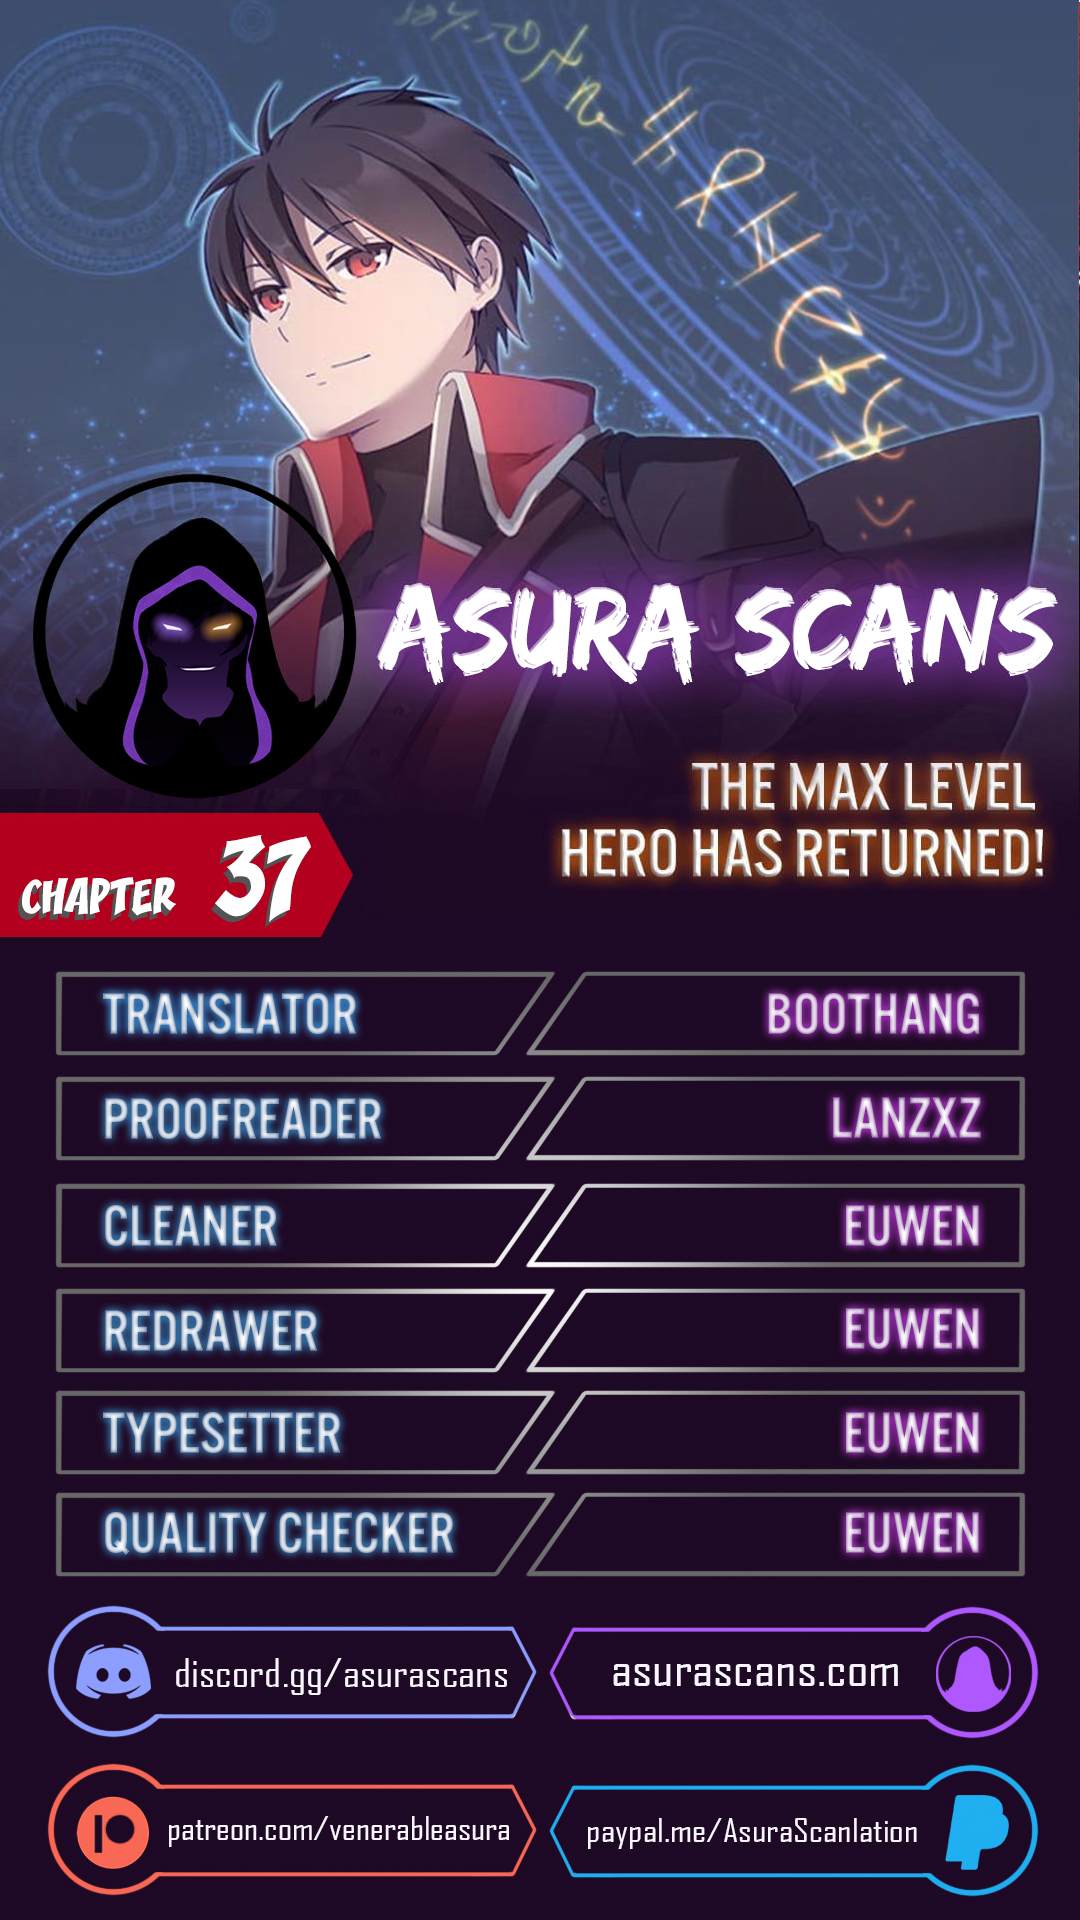 The MAX leveled hero will return! Chapter 37